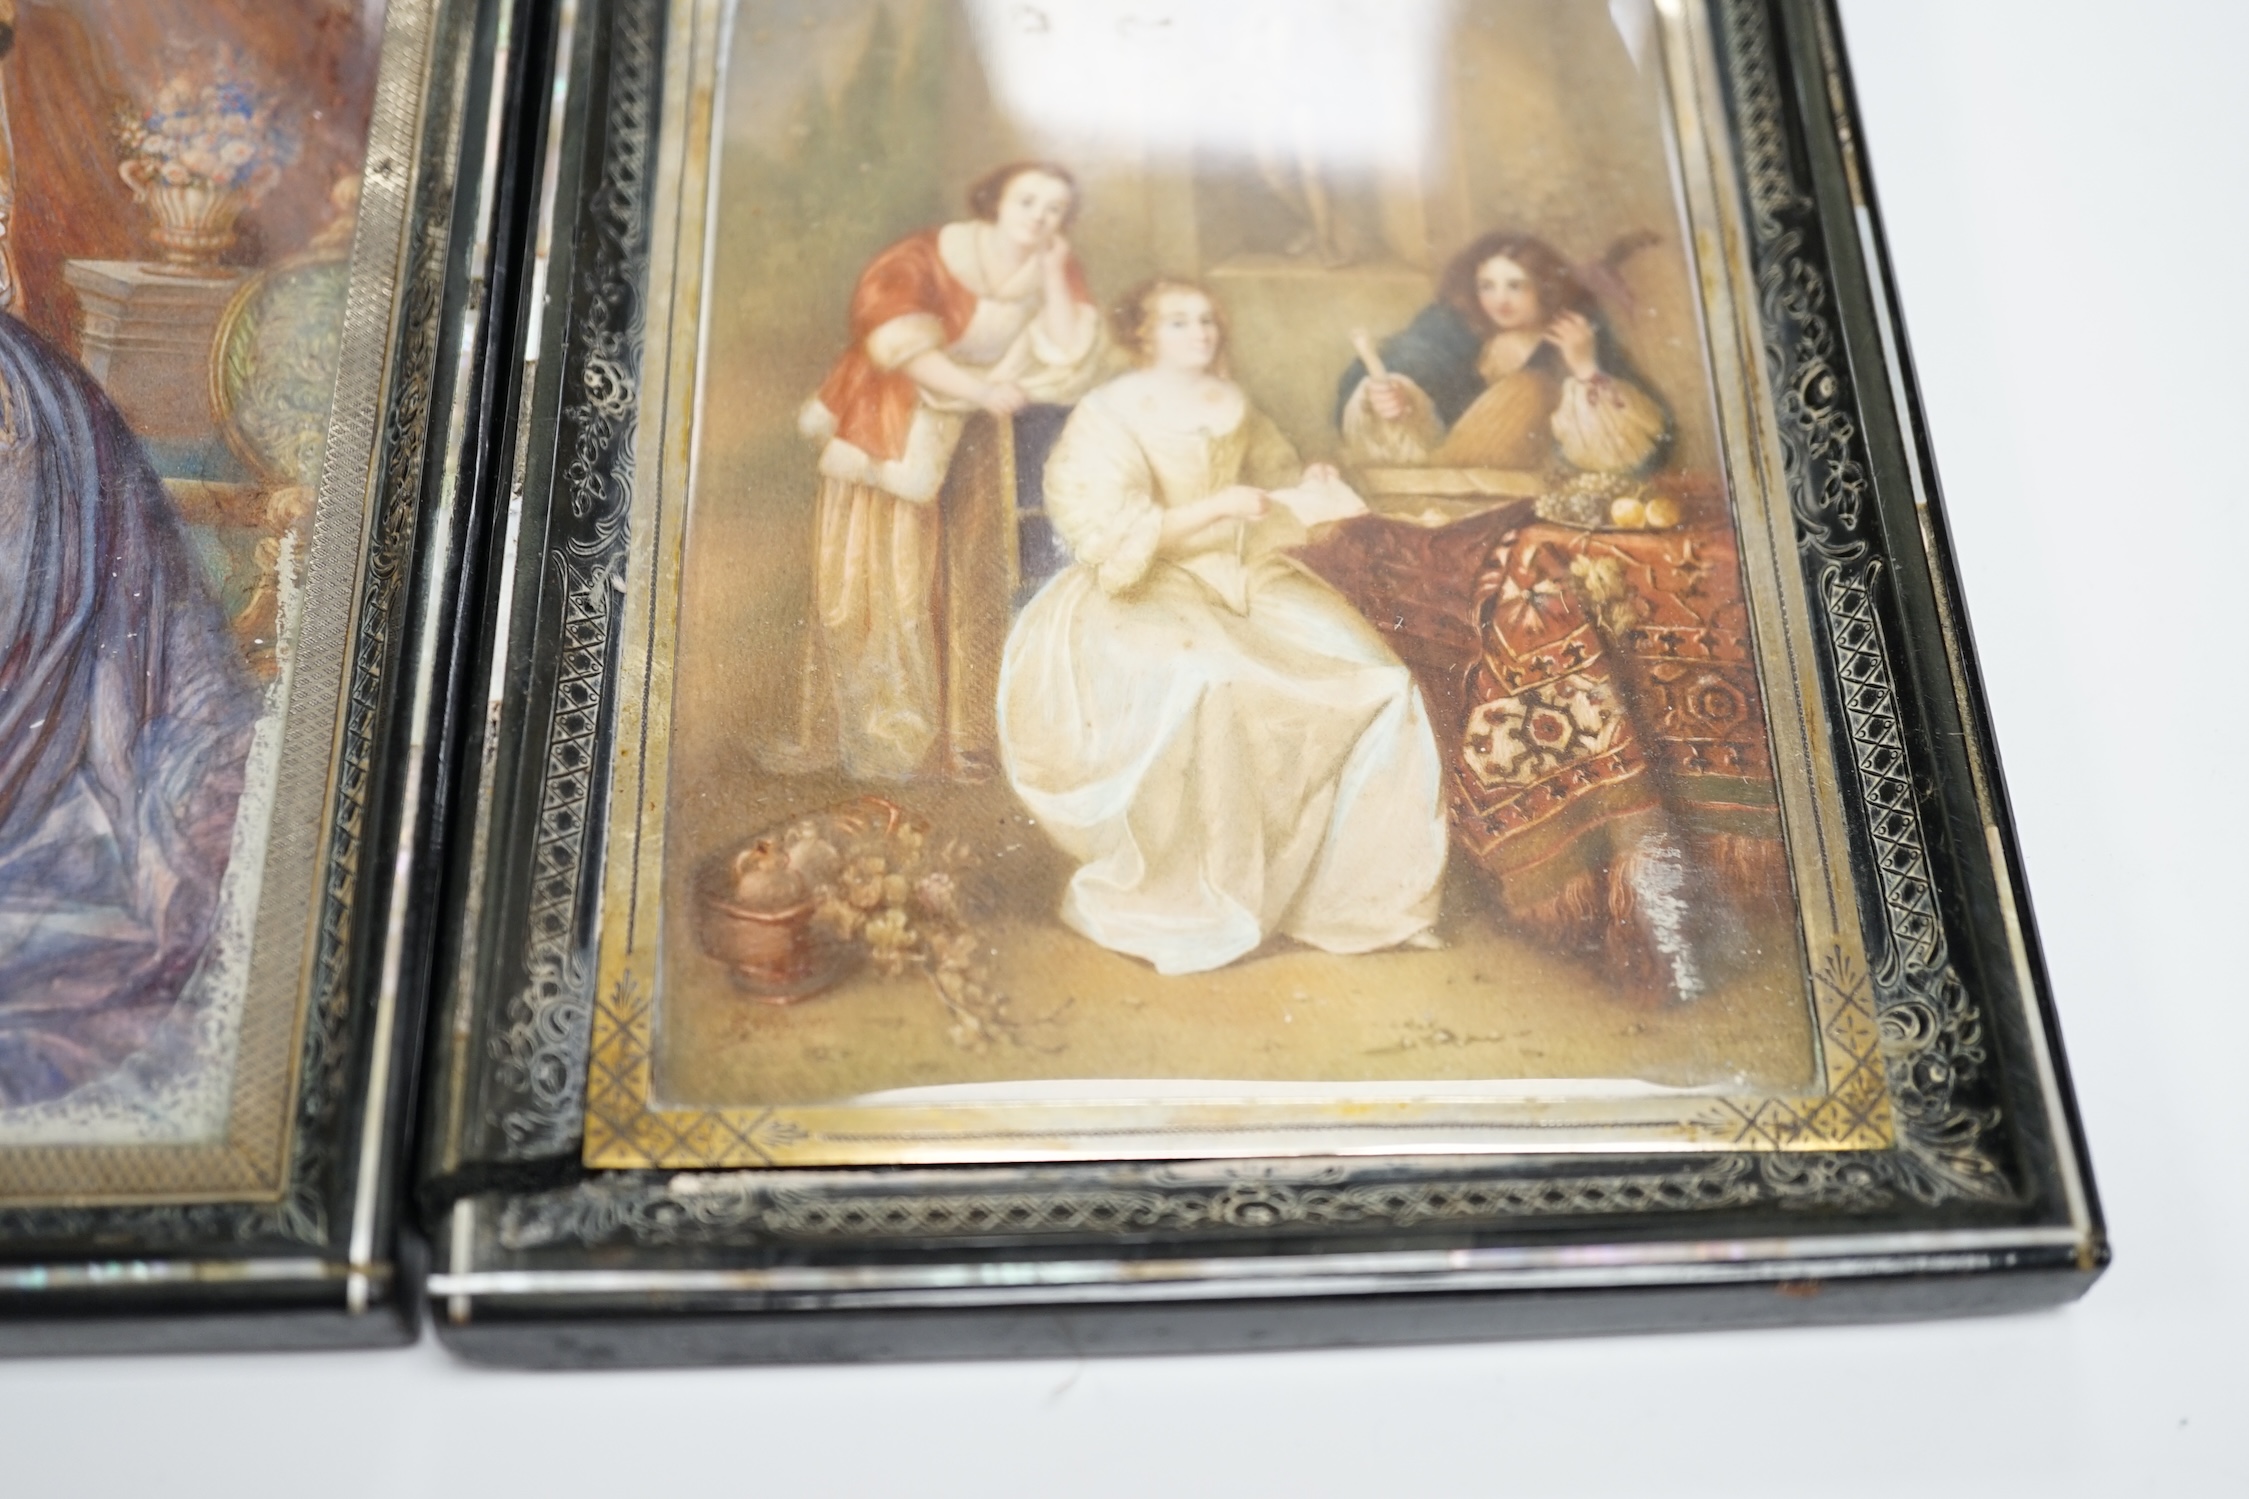 A pair of mid 19th century watercolour miniatures on ivory, Queen Victoria and three figures wearing 17th century dress, housed in inlaid and ebonised frames, 13 x 9cm CITES Submission reference 644V5FRS